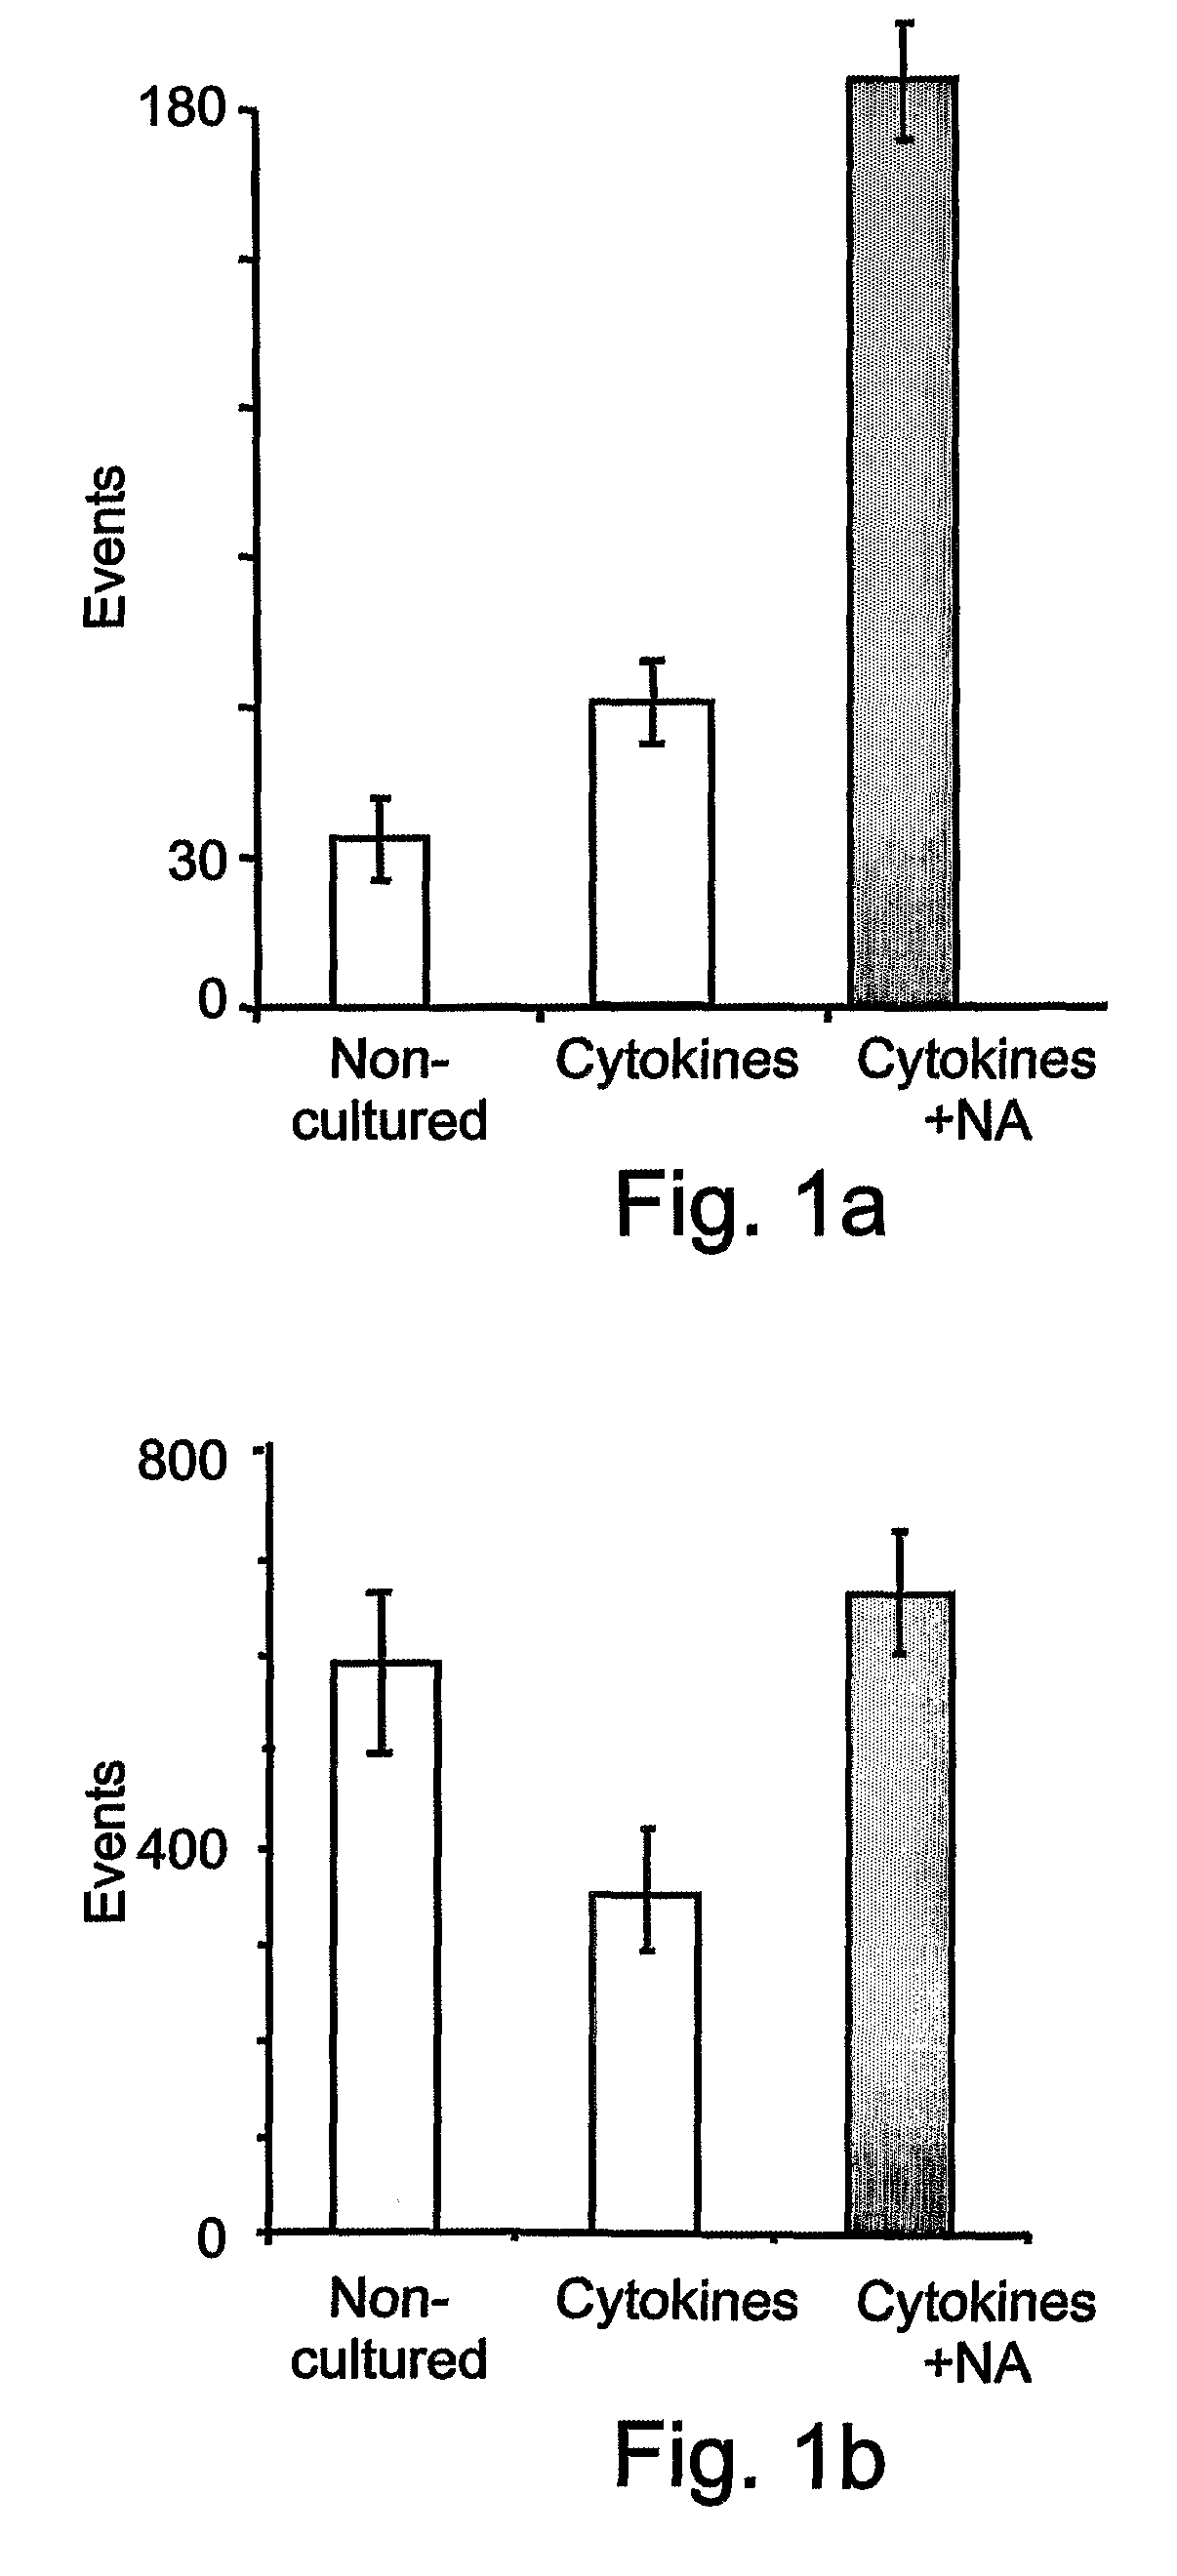 Methods of Improving Stem Cell Homing and Engraftment